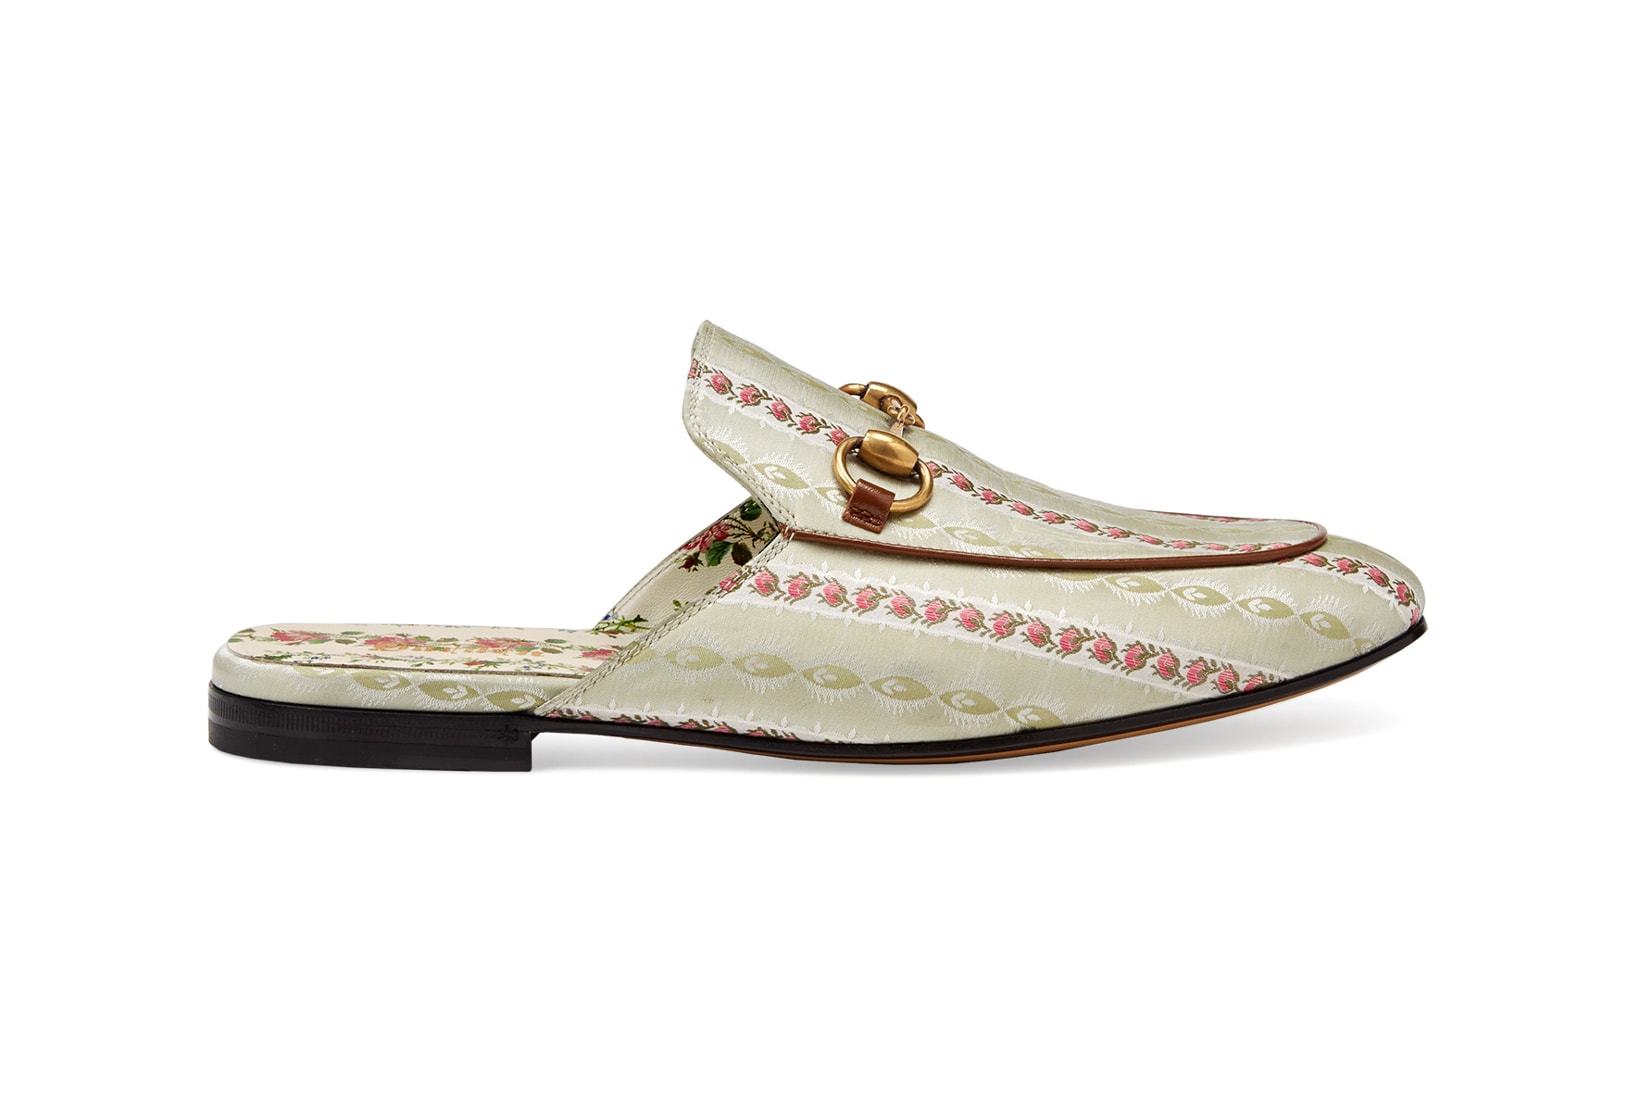 Gucci Garden Capsule Collection Princetown Patterned Slipper Cream Gold